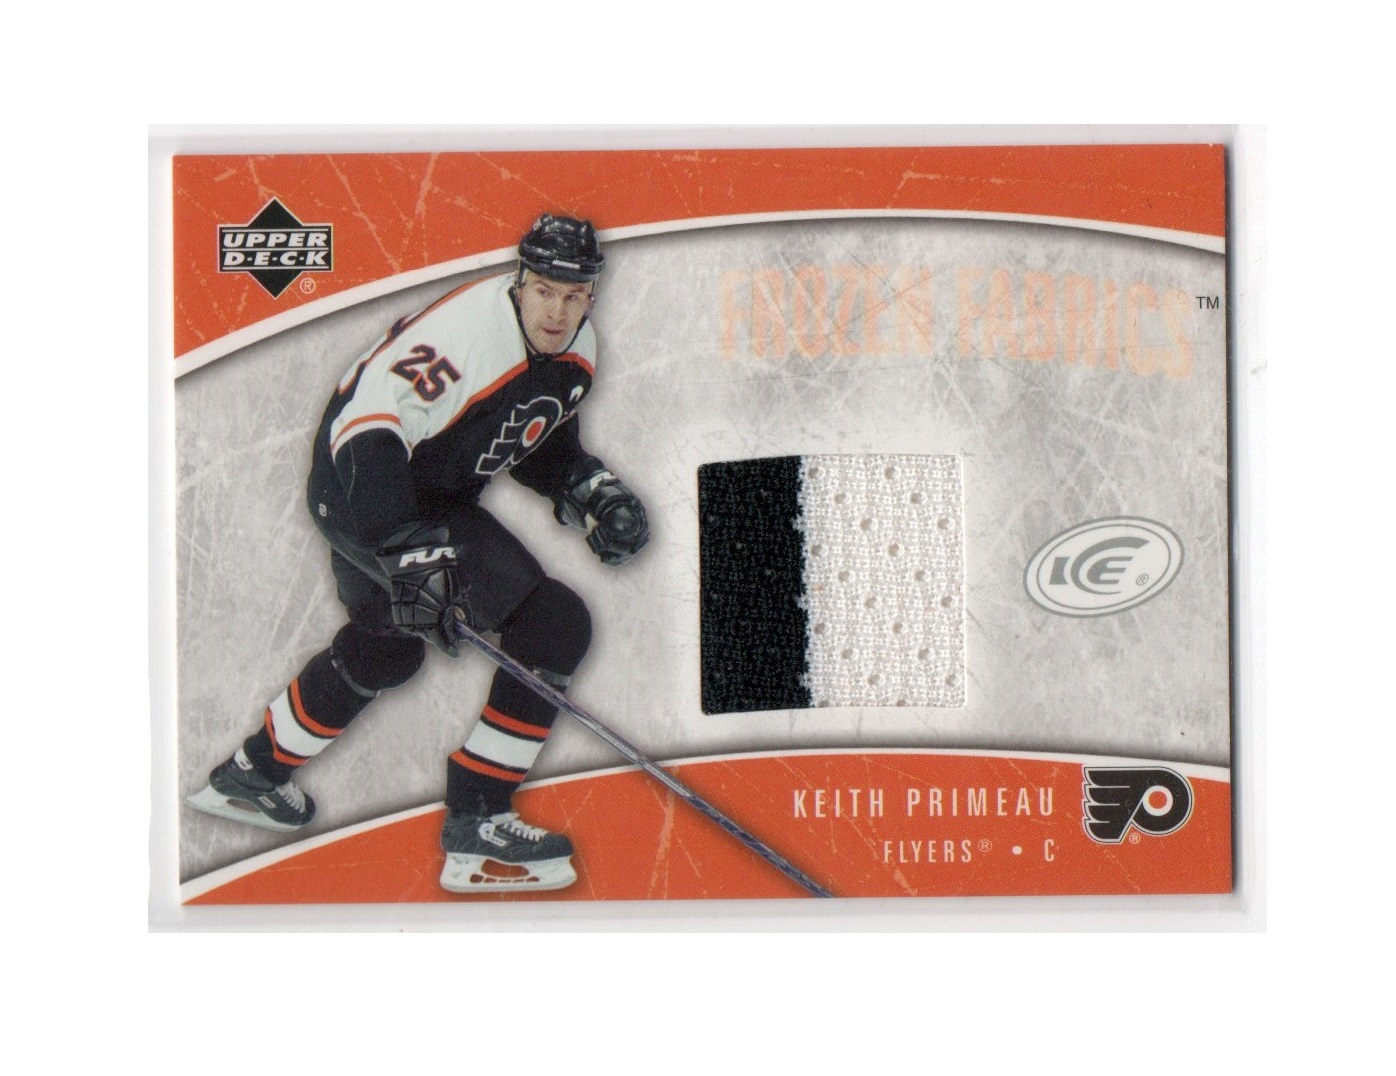 2005-06 Upper Deck Ice Frozen Fabrics #FFKP Keith Primeau (30-X236-GAMEUSED-FLYERS)